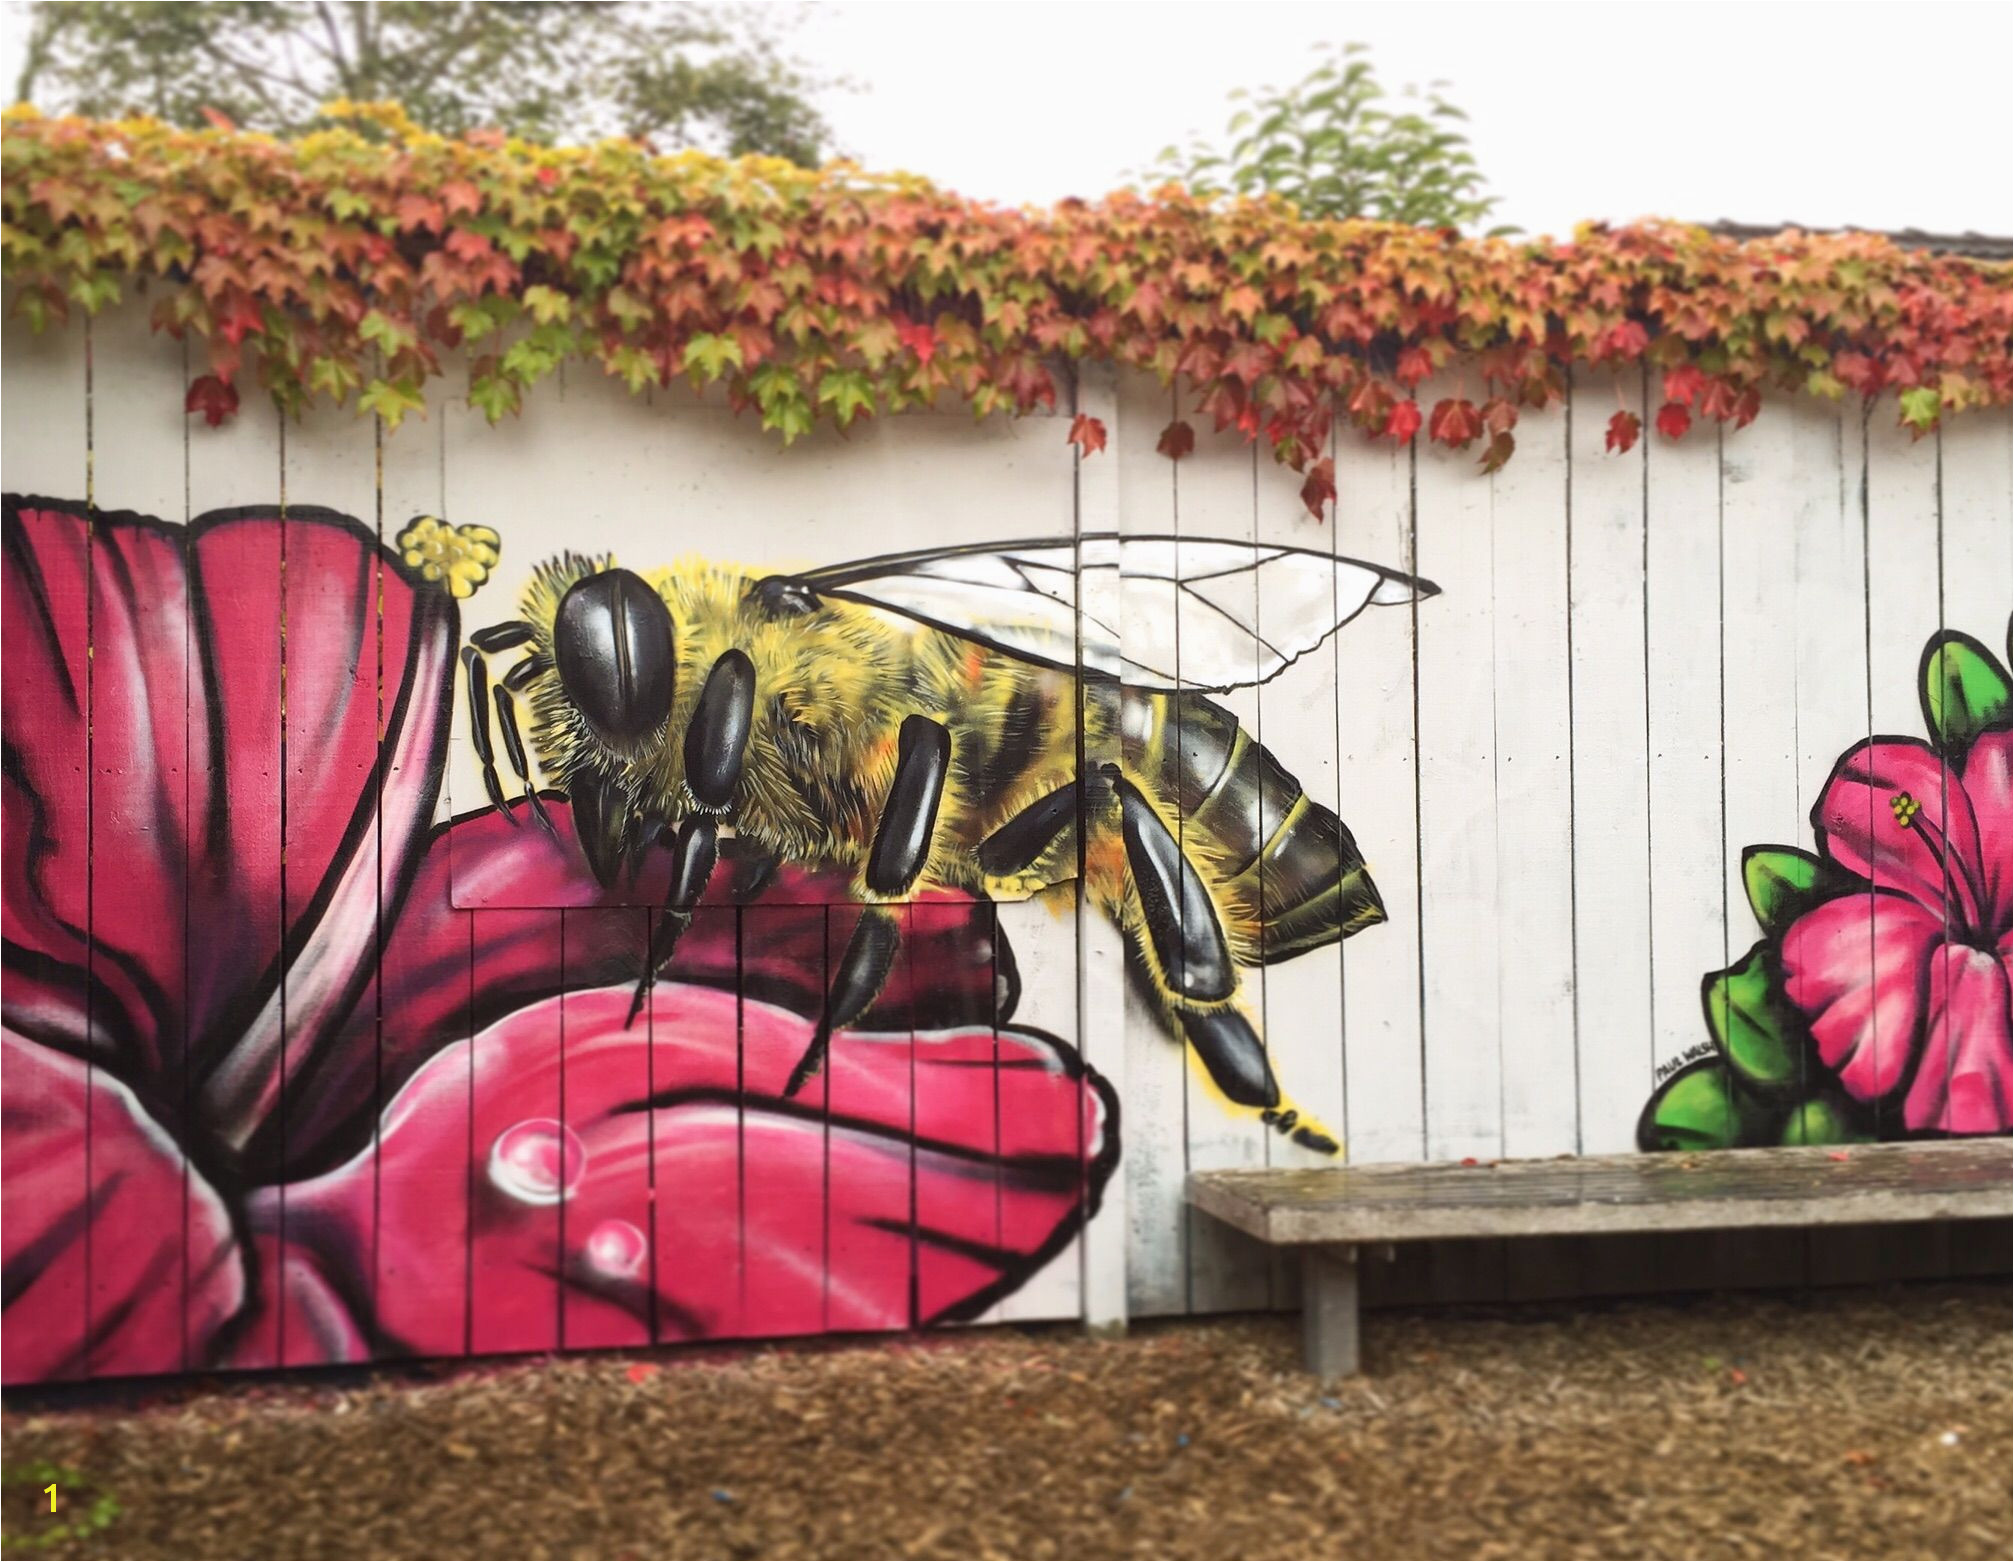 I spent my Sunday morning painting a bee on the fence of a local munity centre